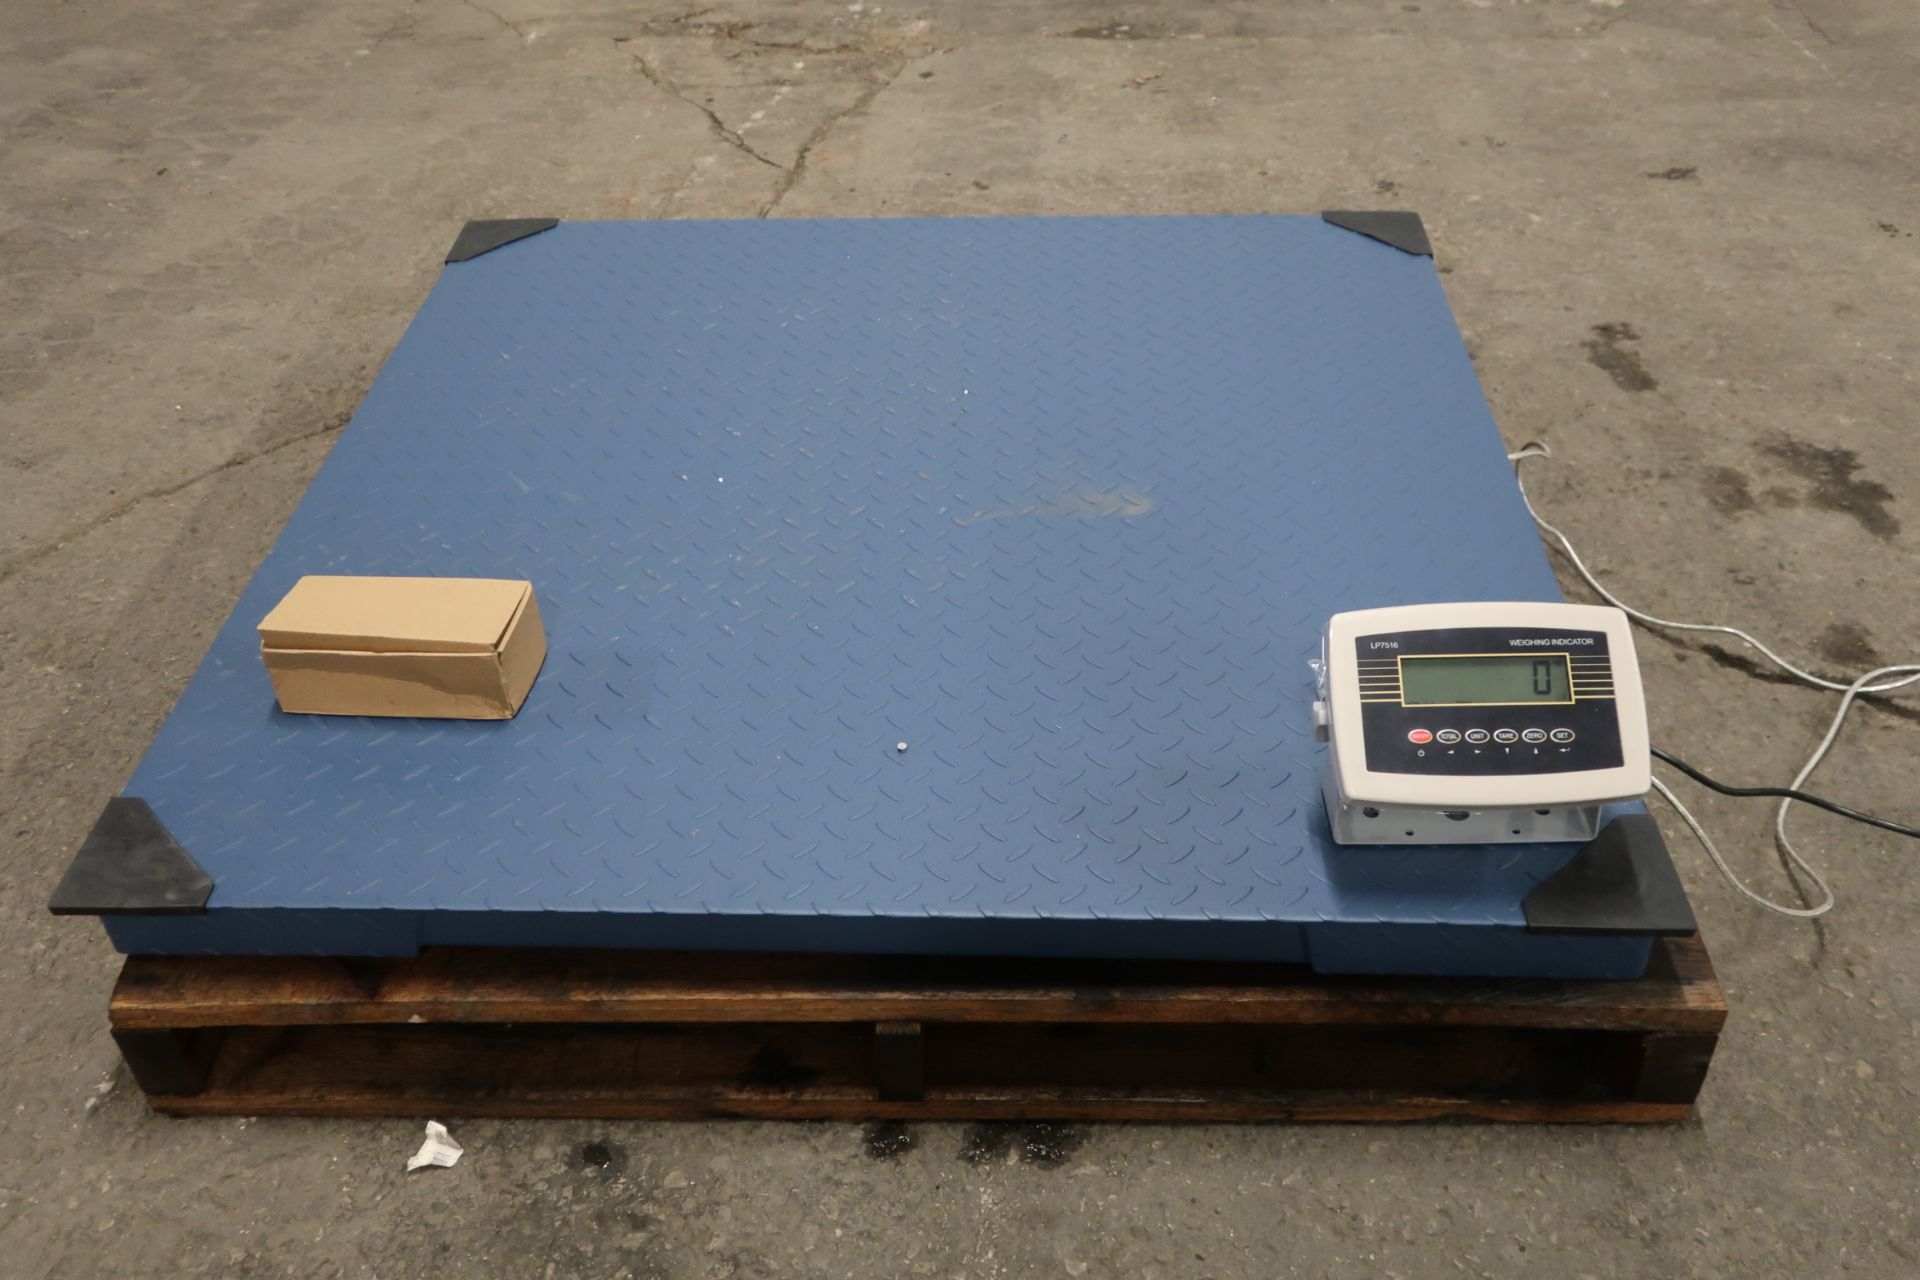 MINT 6500lb digital floor scale - 48" x 48" - Great DRO (digital readout) with 1lb accuracy